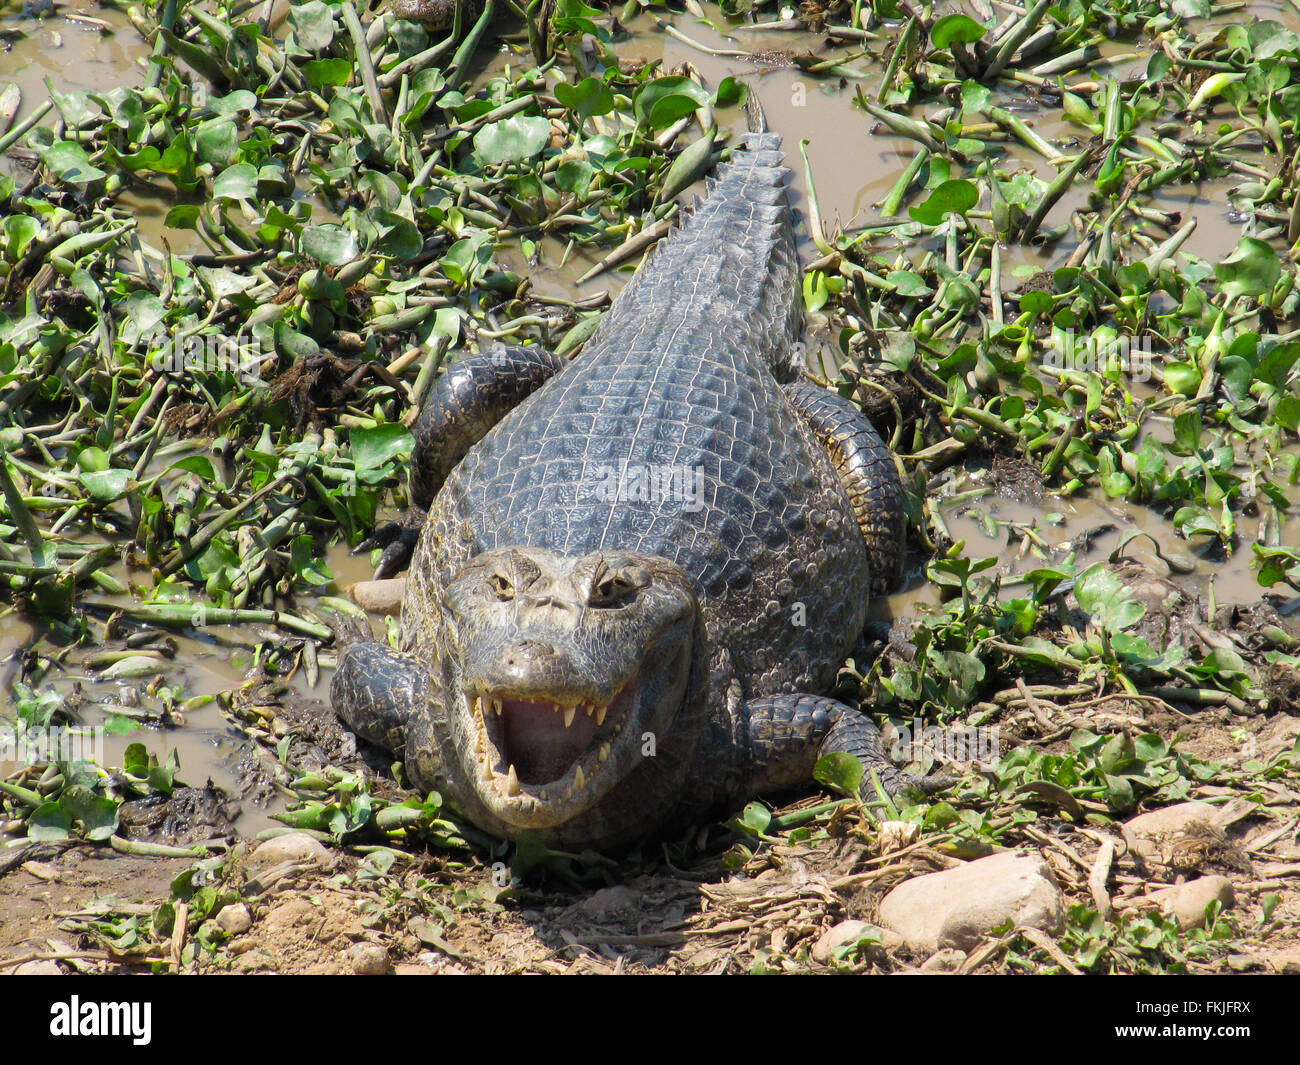 Large Caiman in the Pantanal, Mato Grosso Do Sul, Brazil Stock Photo